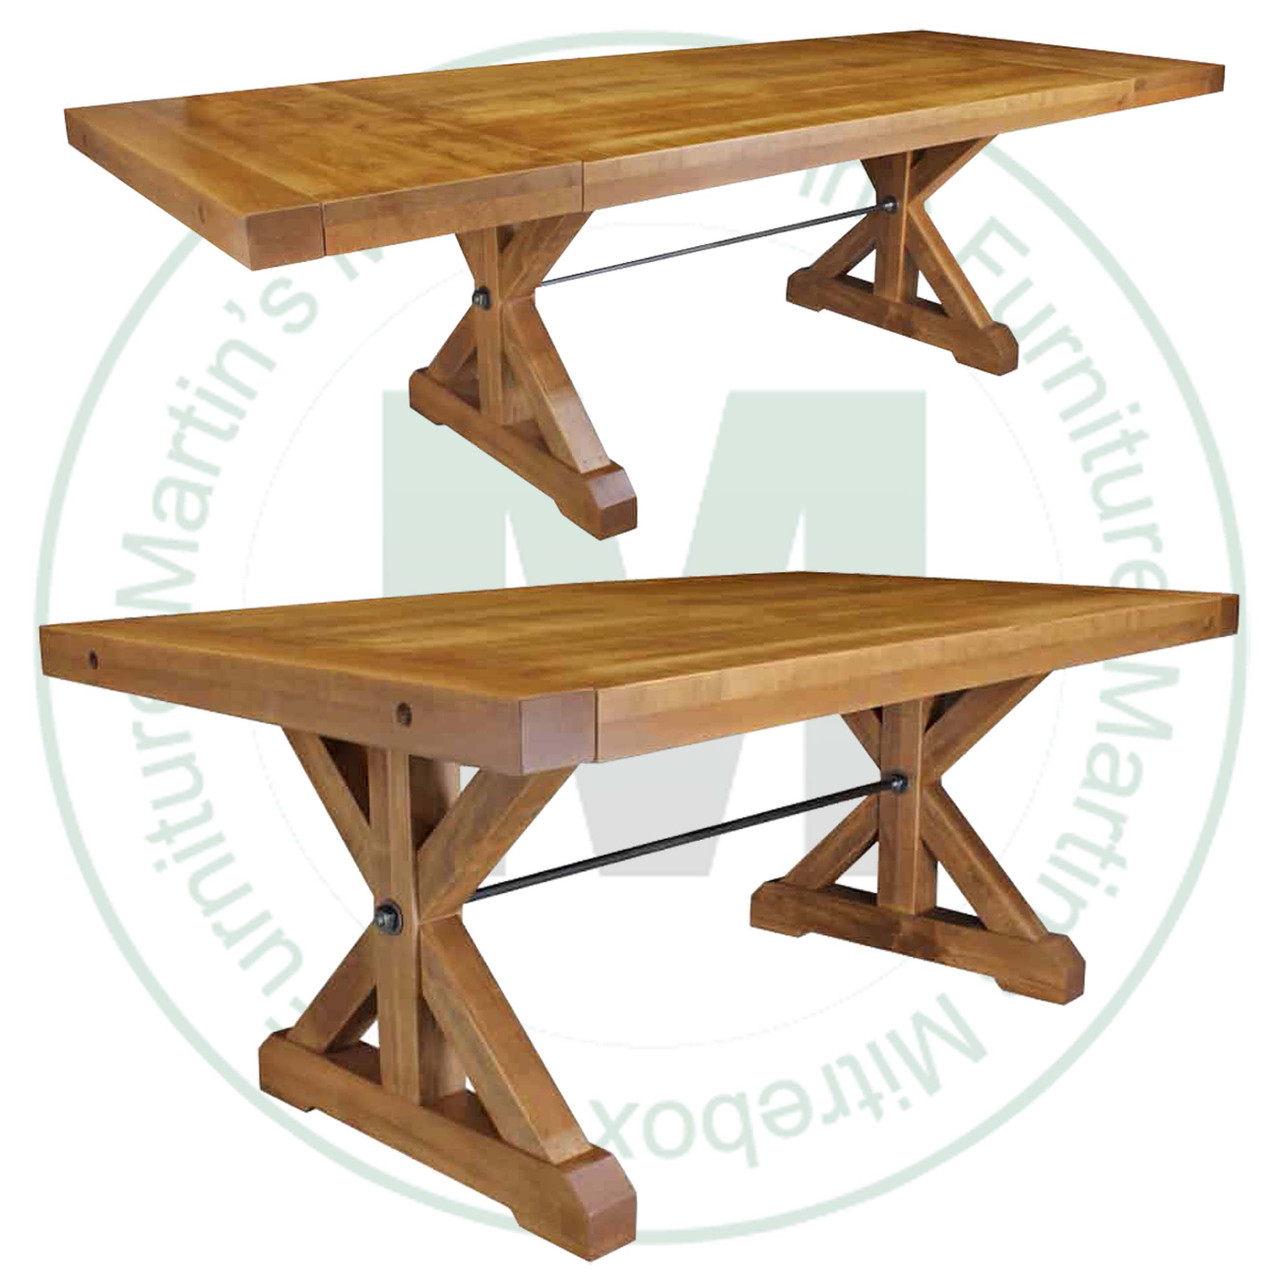 Wormy Maple Klondike Trestle Solid Top Table 42'' Deep x 60'' Wide x 30'' High With 2 - 16'' Leaves